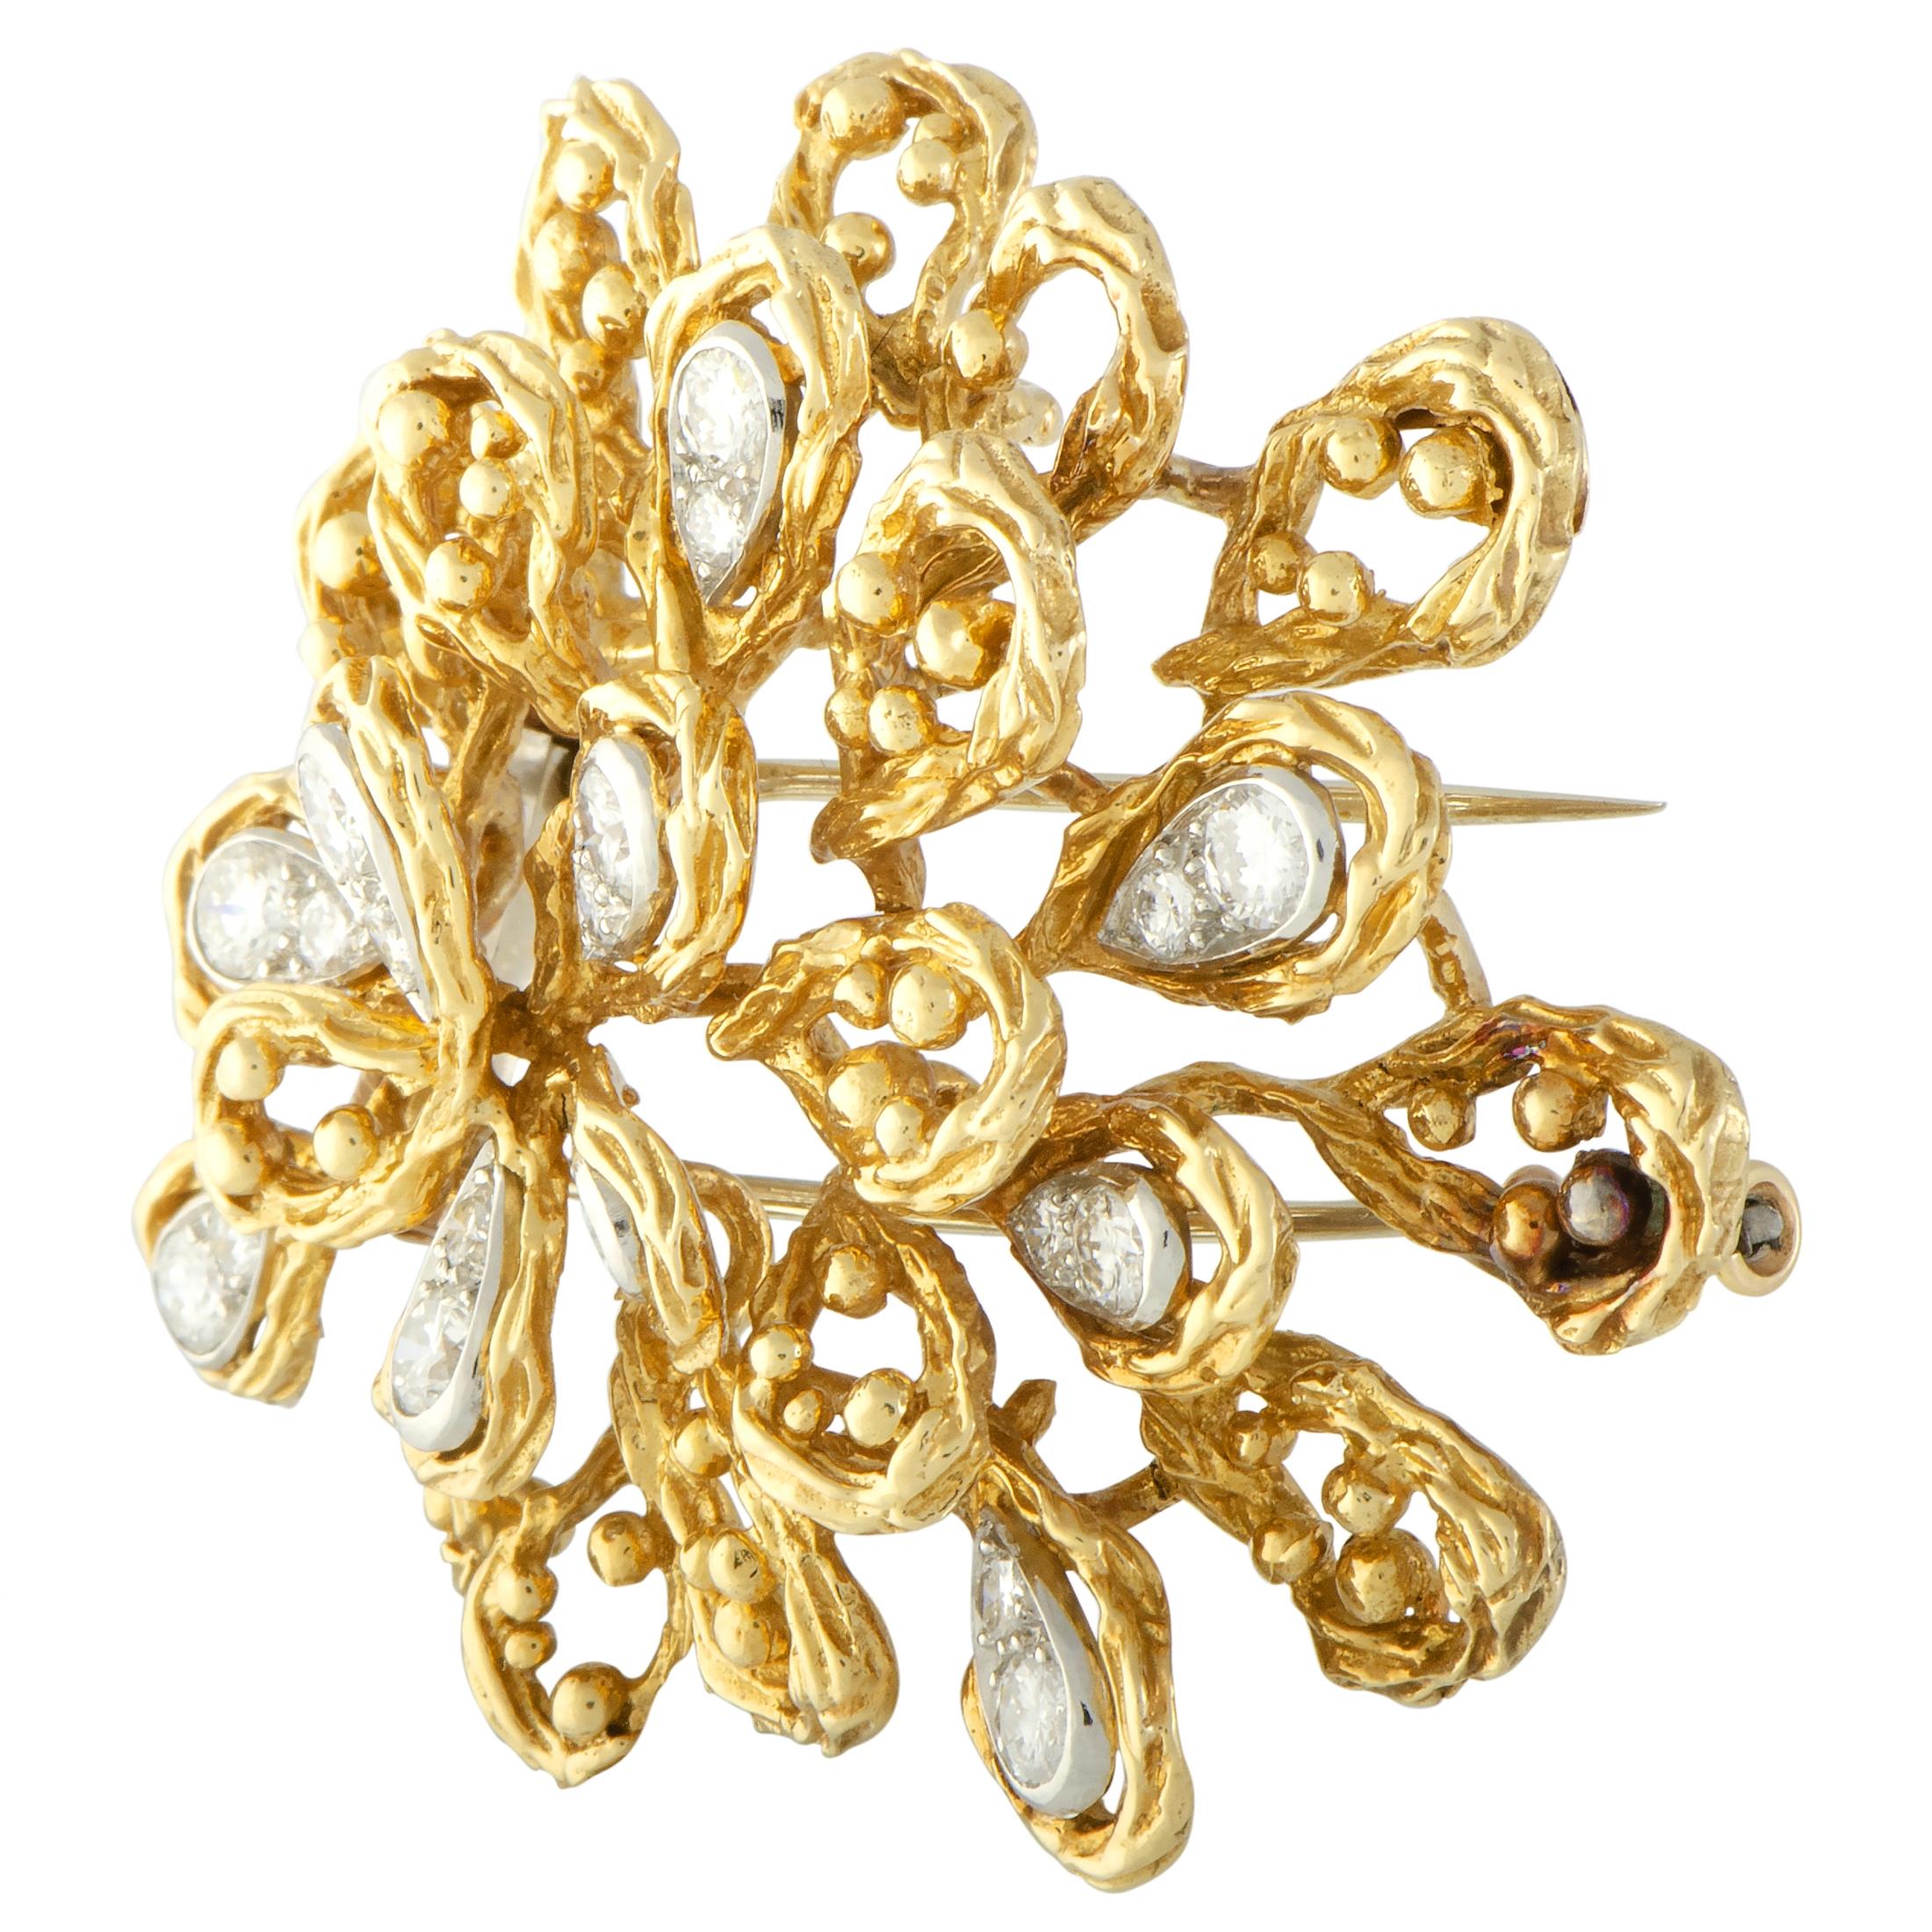 This gorgeous vintage brooch from Van Cleef & Arpels boasts a spellbindingly intricate design and it is marvelously crafted from 18K yellow and 18K white gold. The brooch is given a sublime touch of luxurious glisten by the scintillating diamond